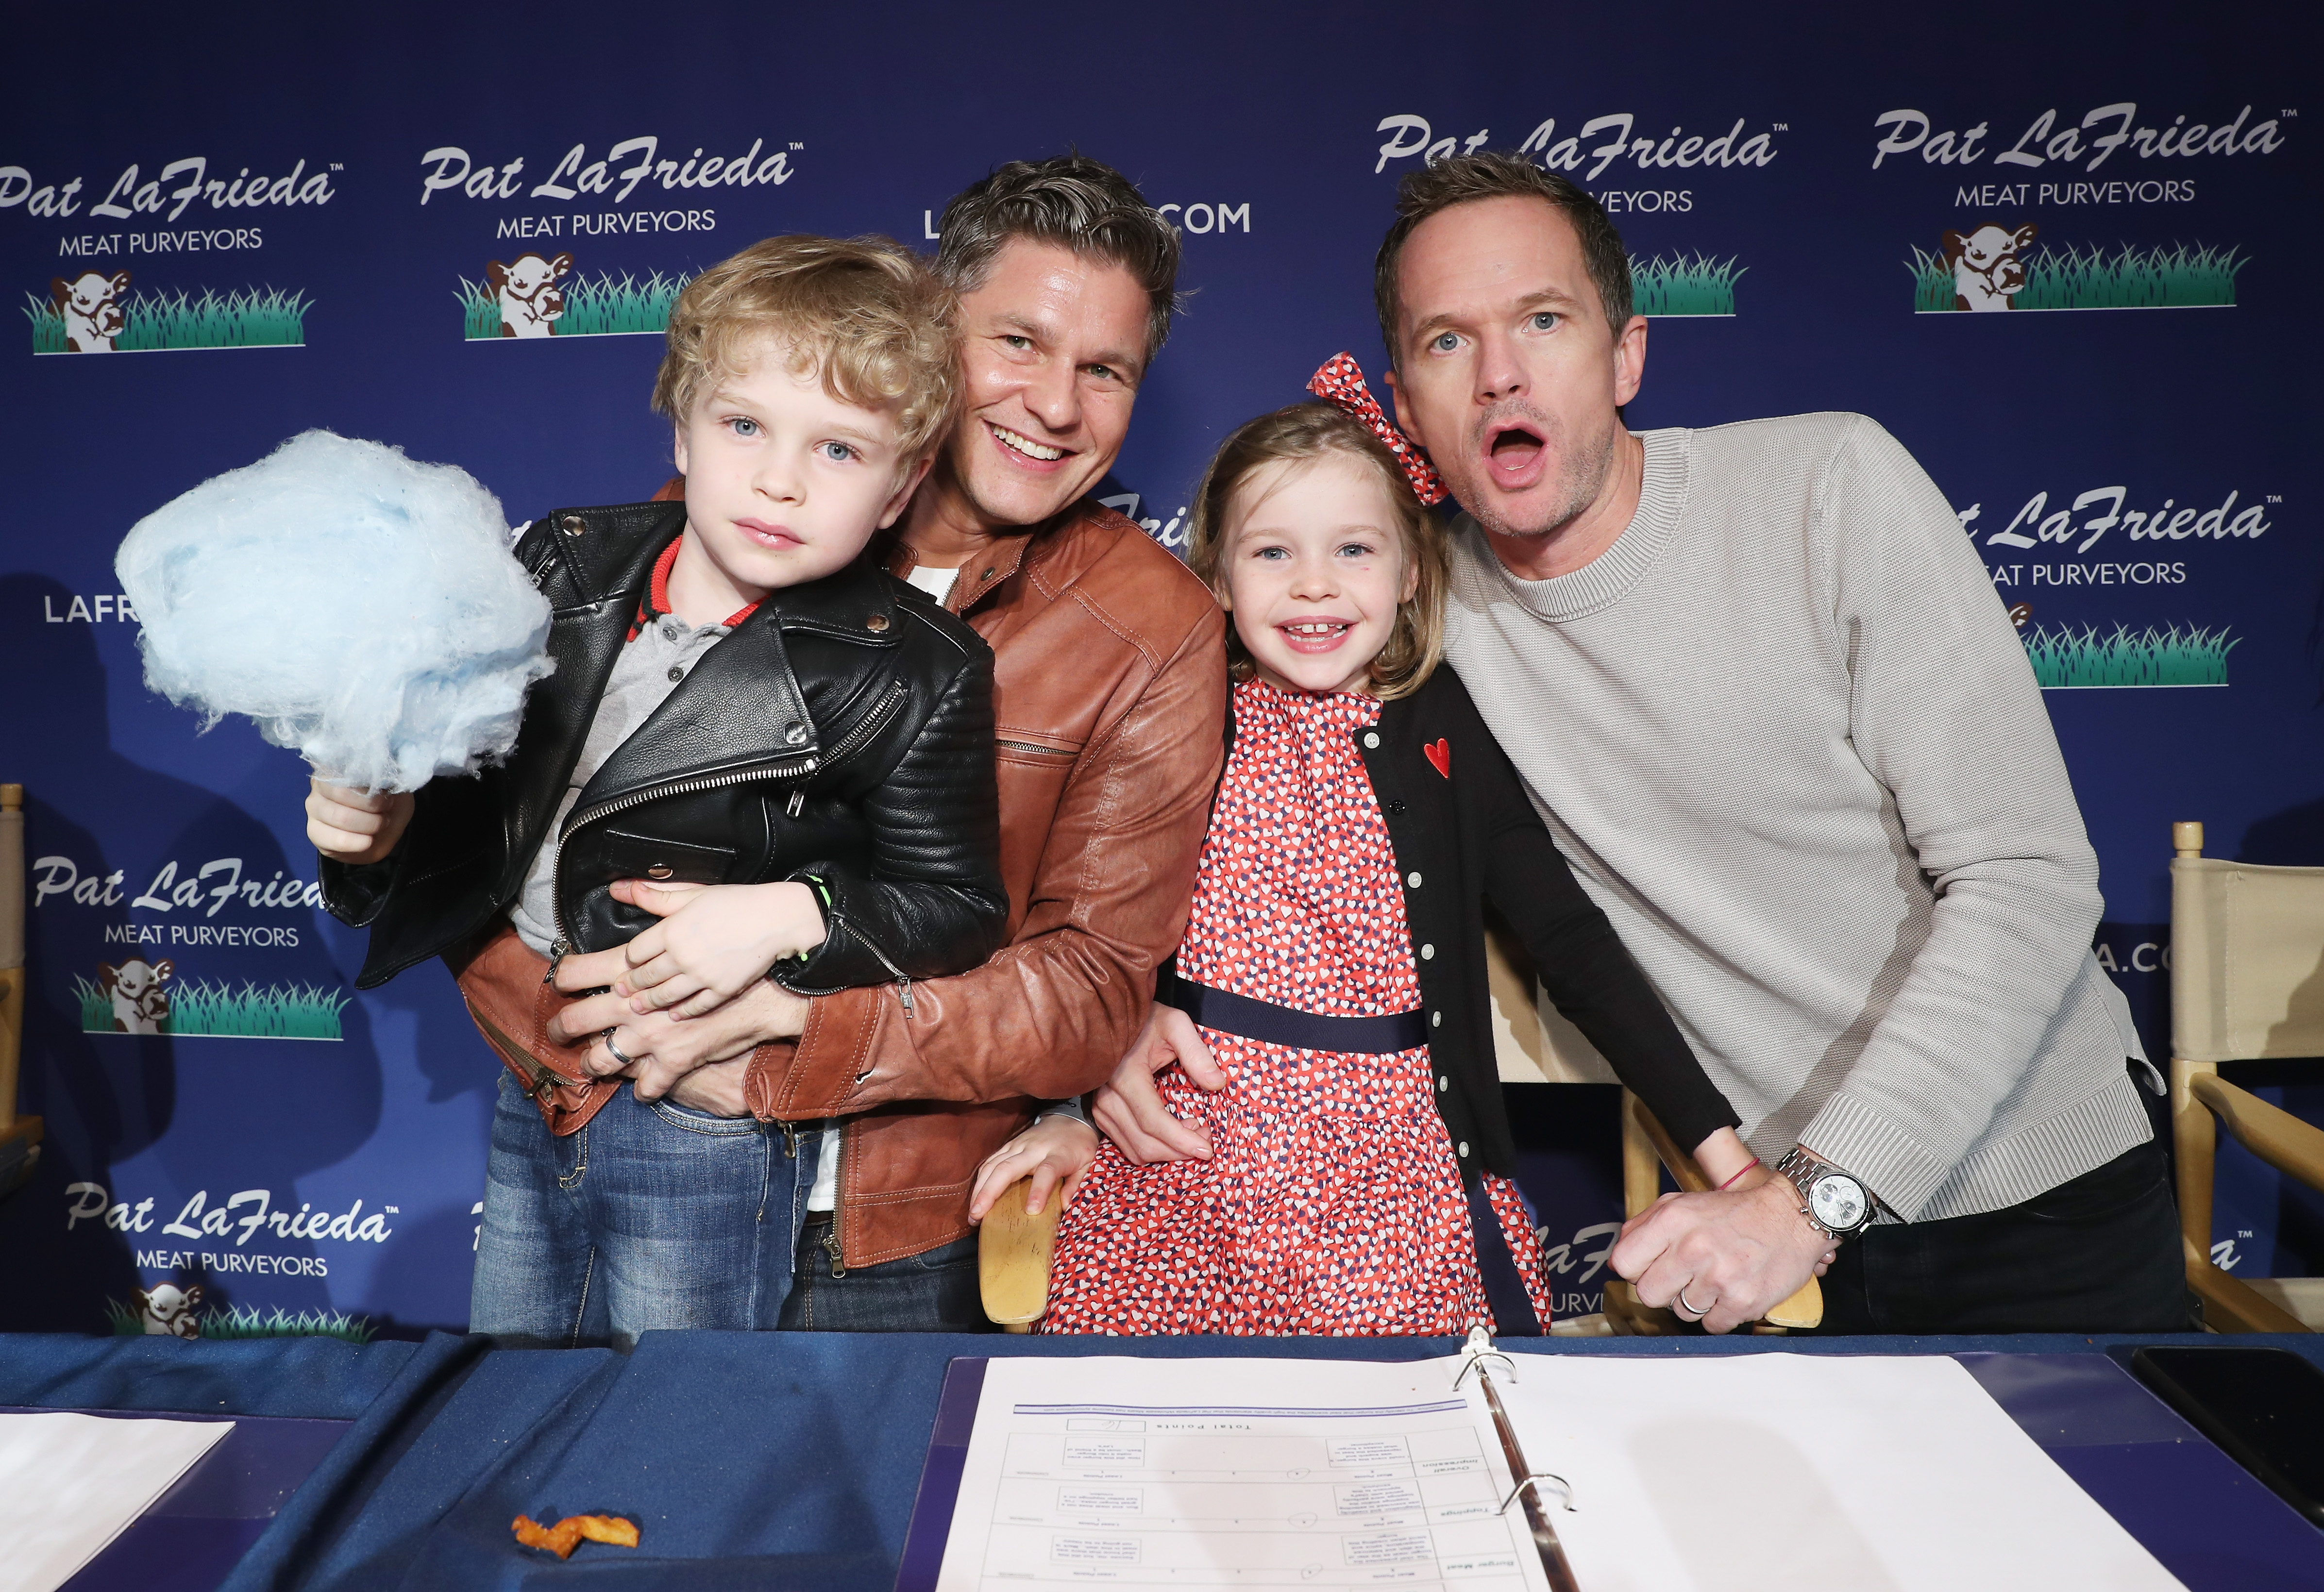 Neil Patrick Harris’ family Halloween costume may just be their scariest one yet